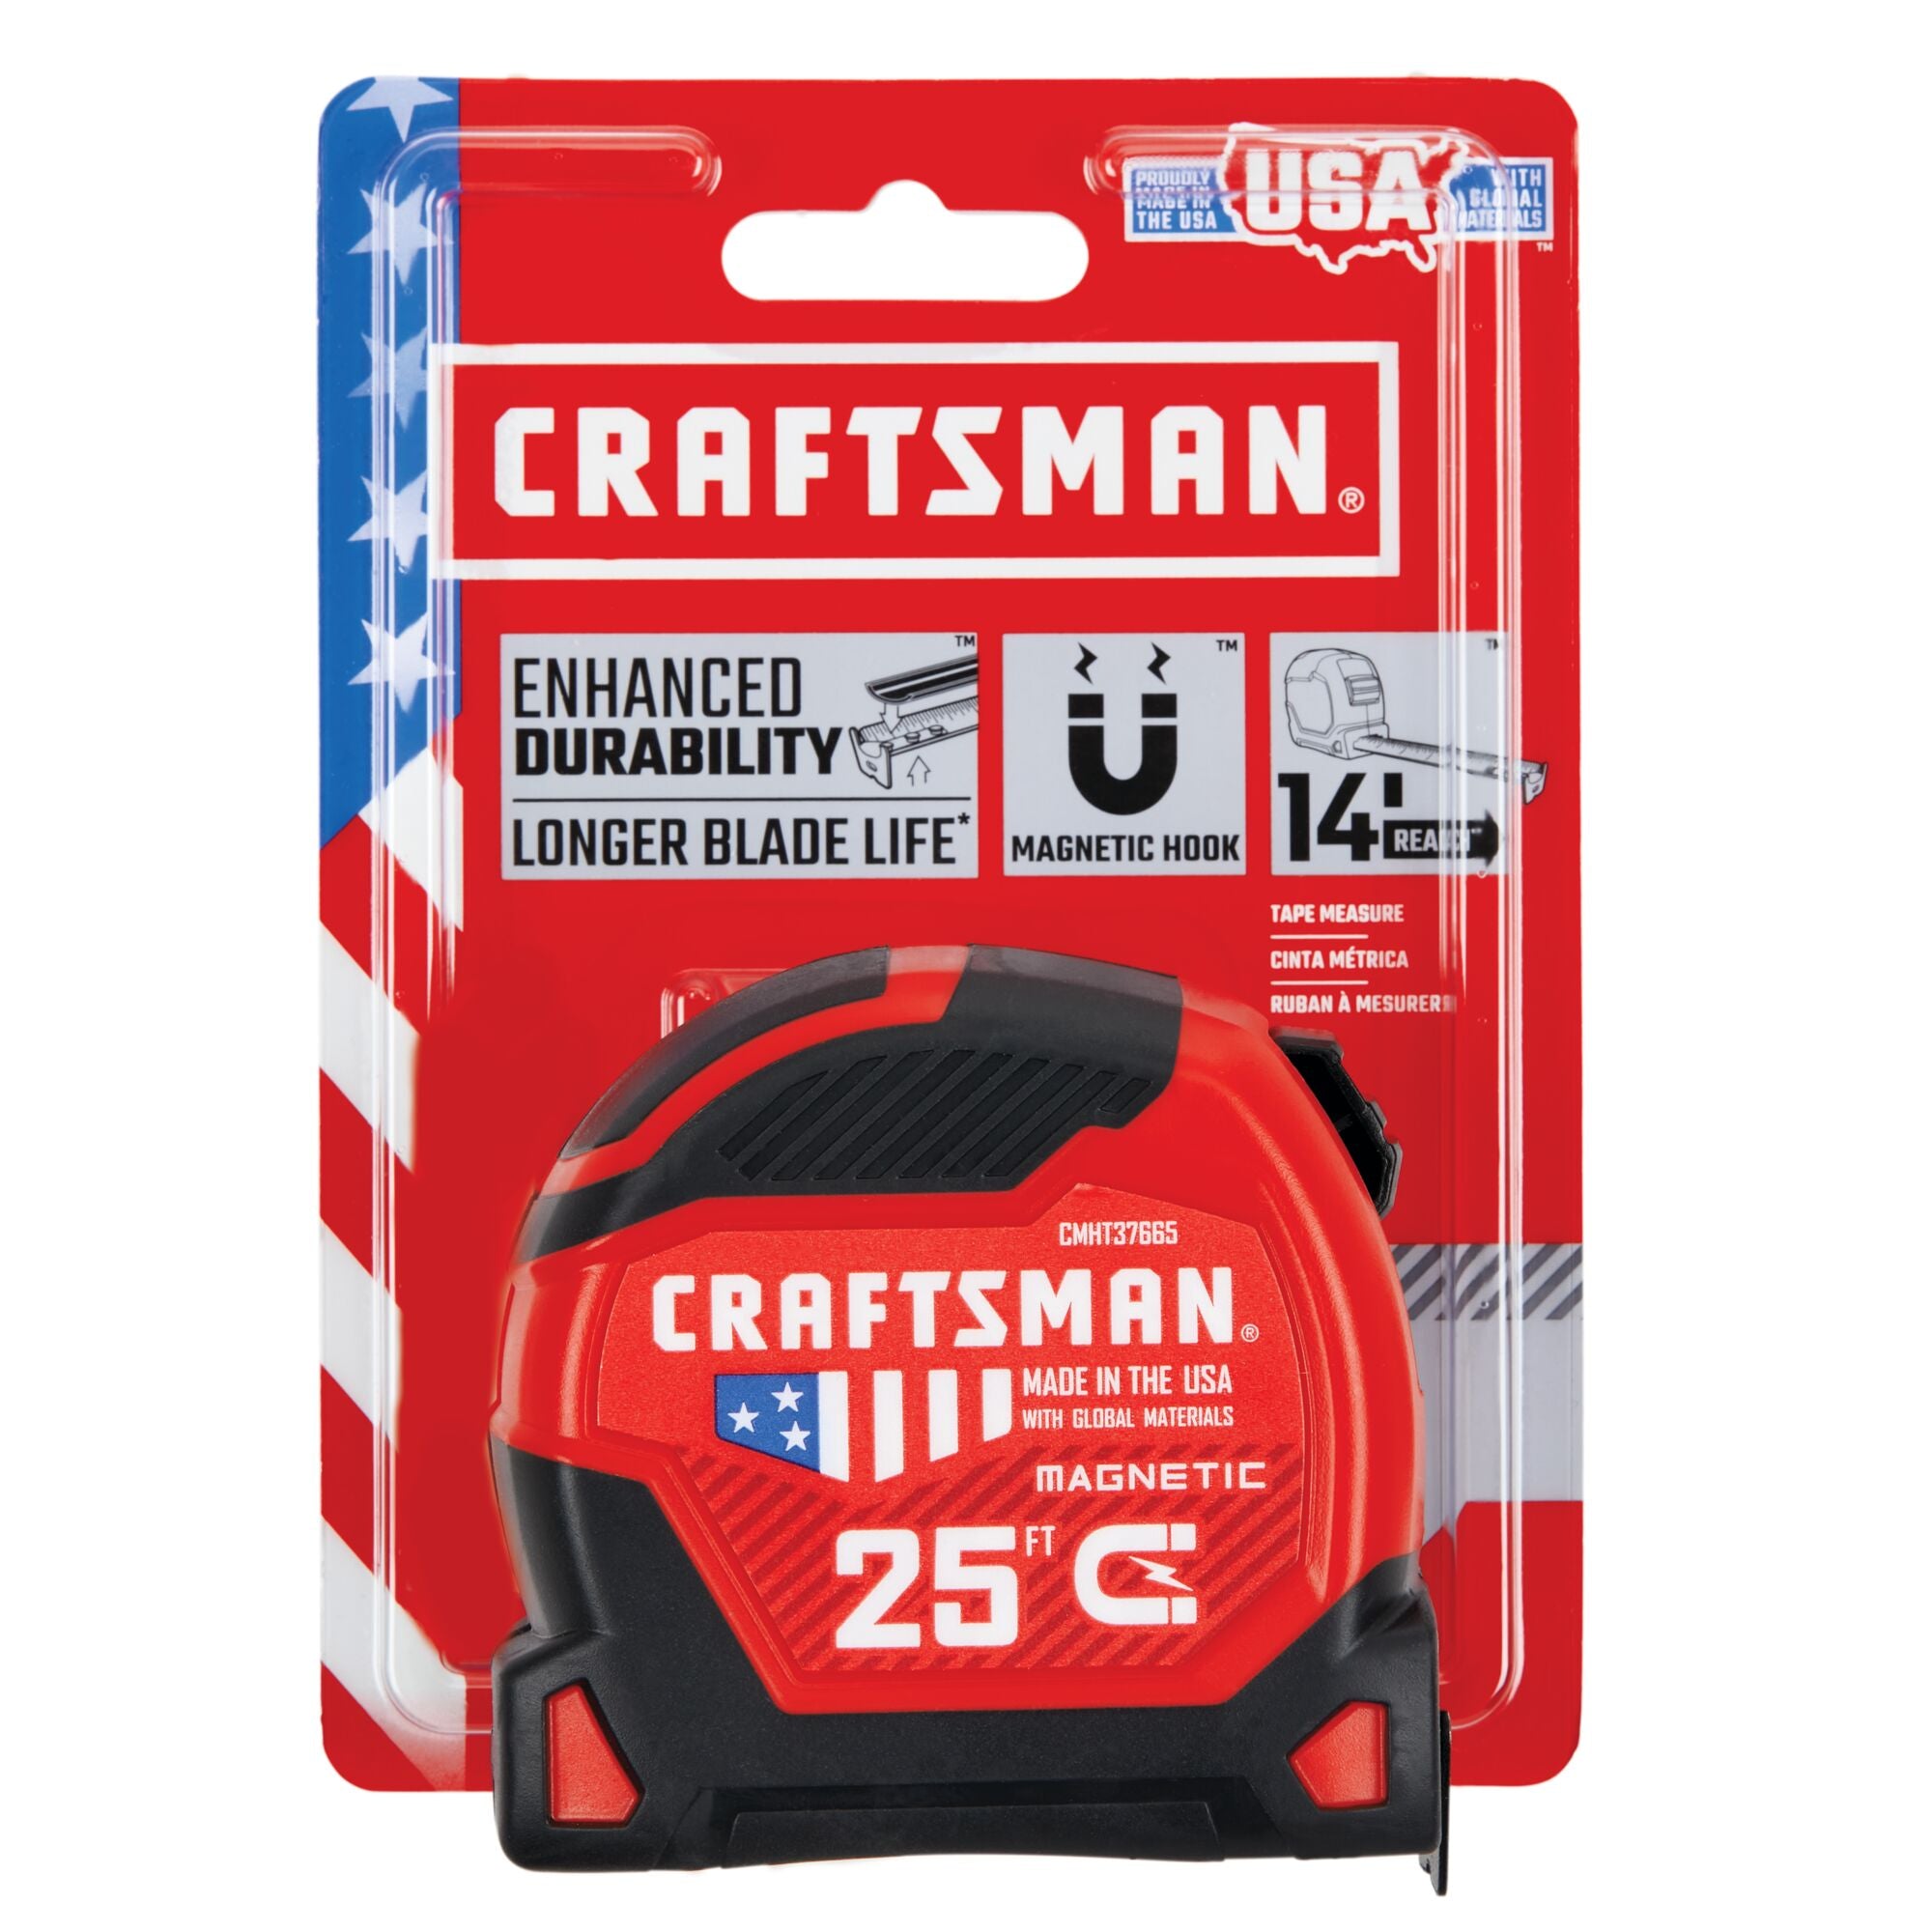 Pro Reach 25 ft Magnetic Tape Measure | CRAFTSMAN